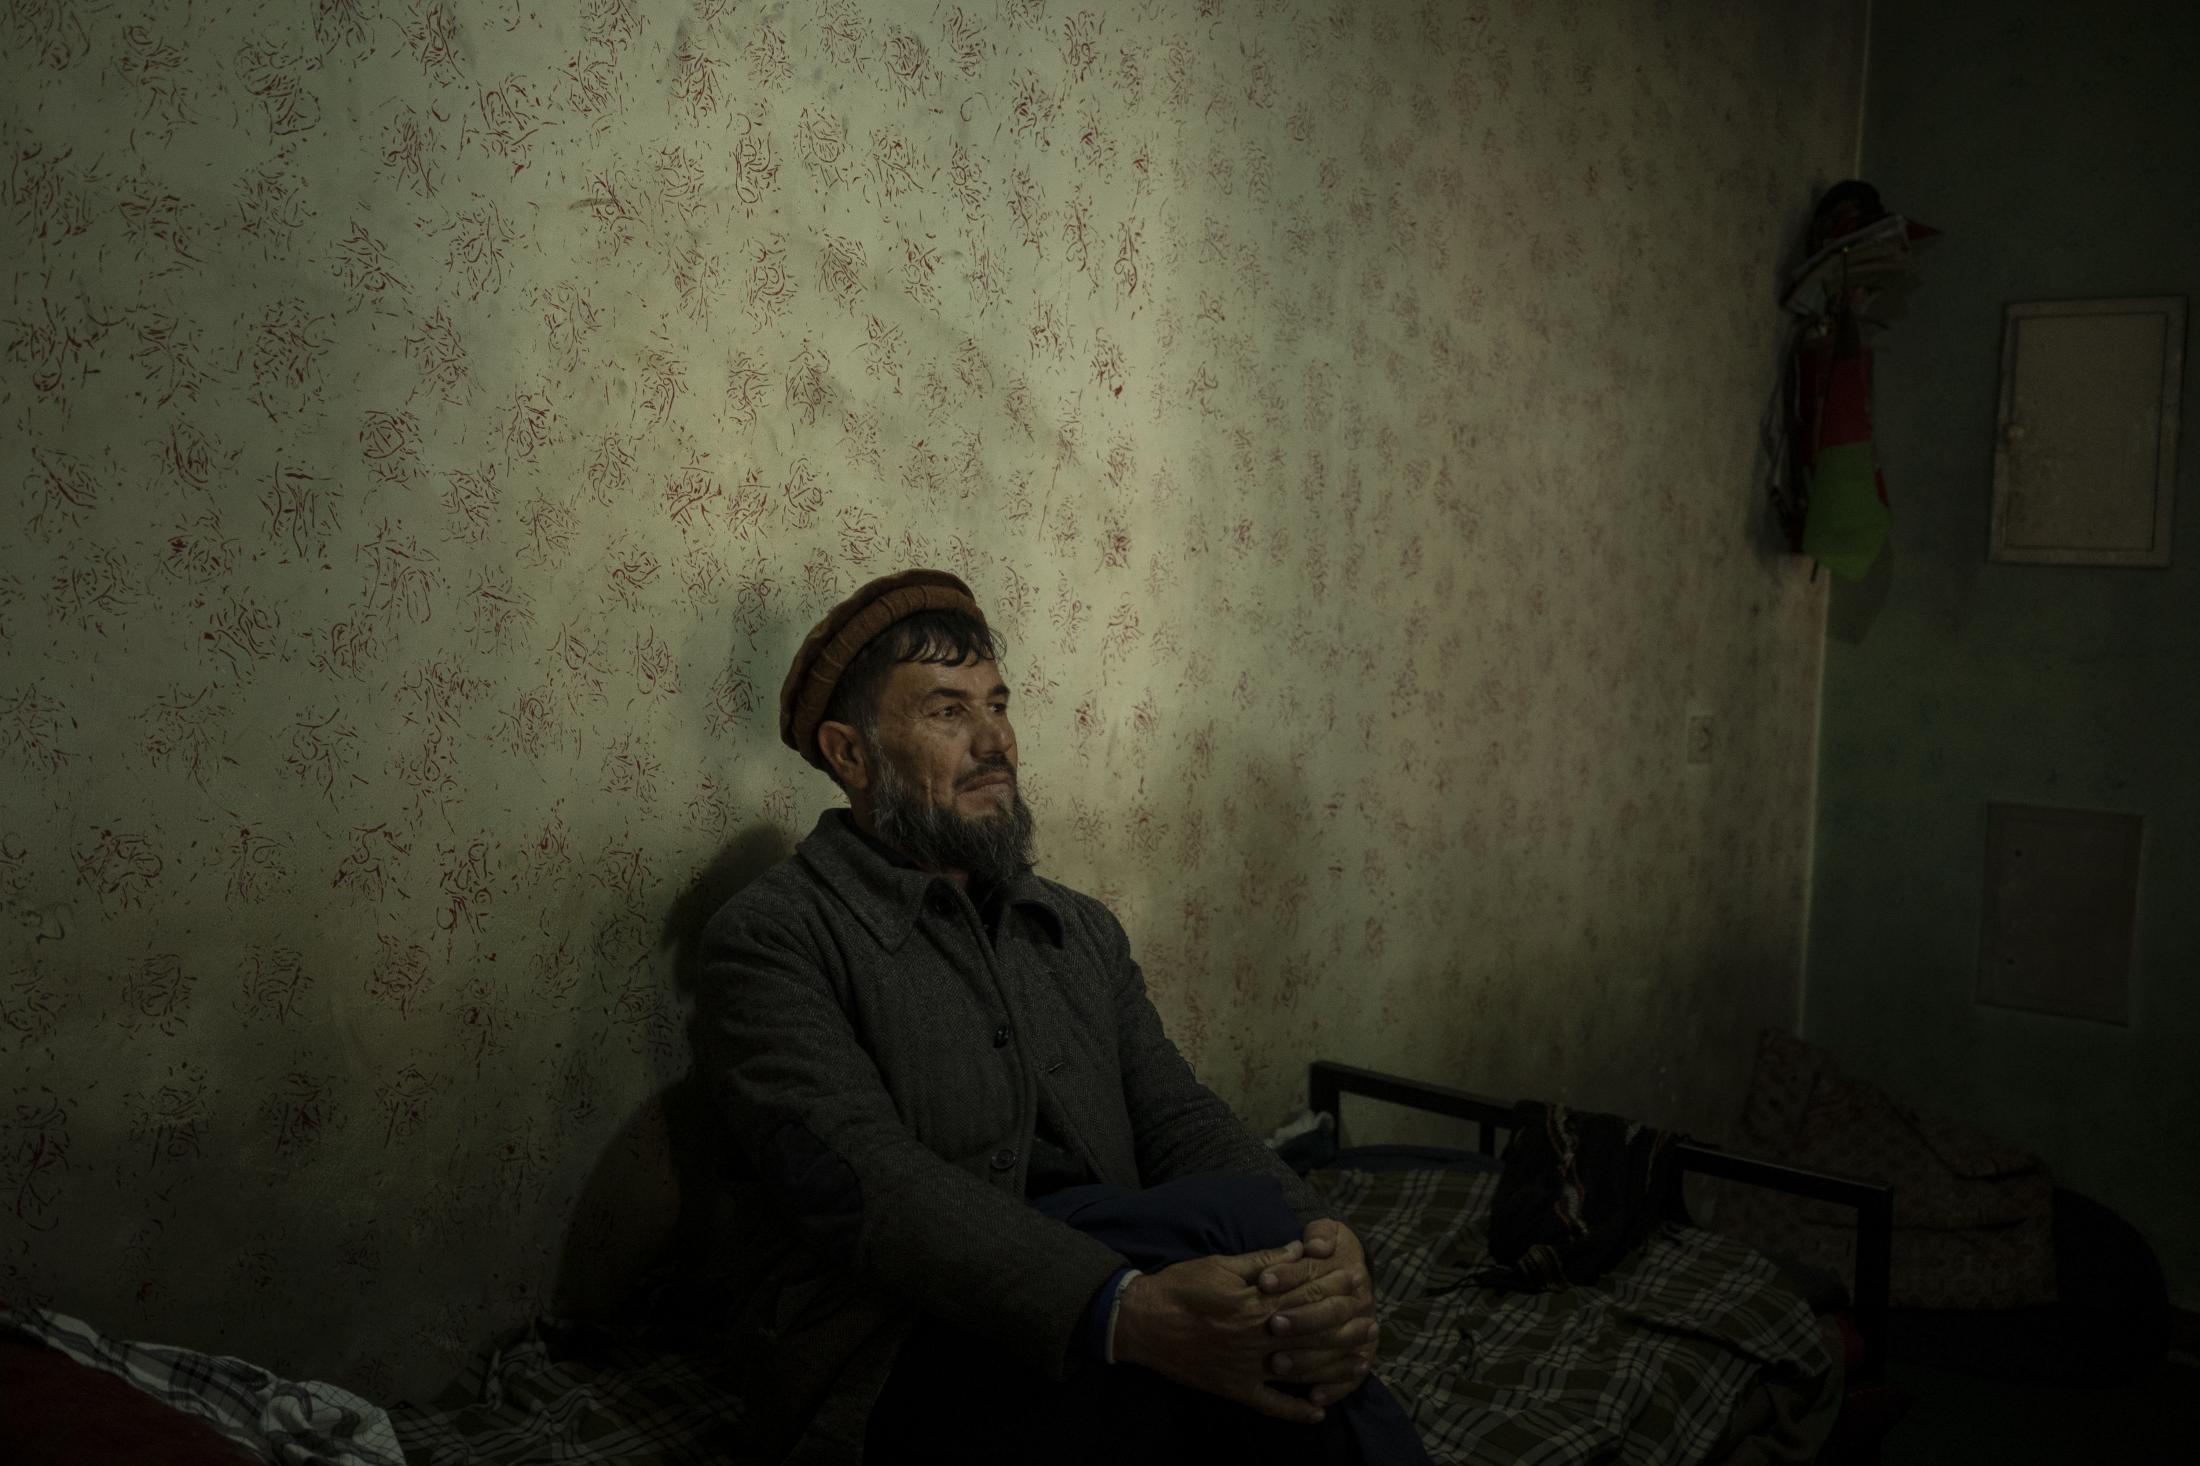 The Cinema of Kabul - Abdul Fatah sits on his bed inside the Ariana Cinema in...